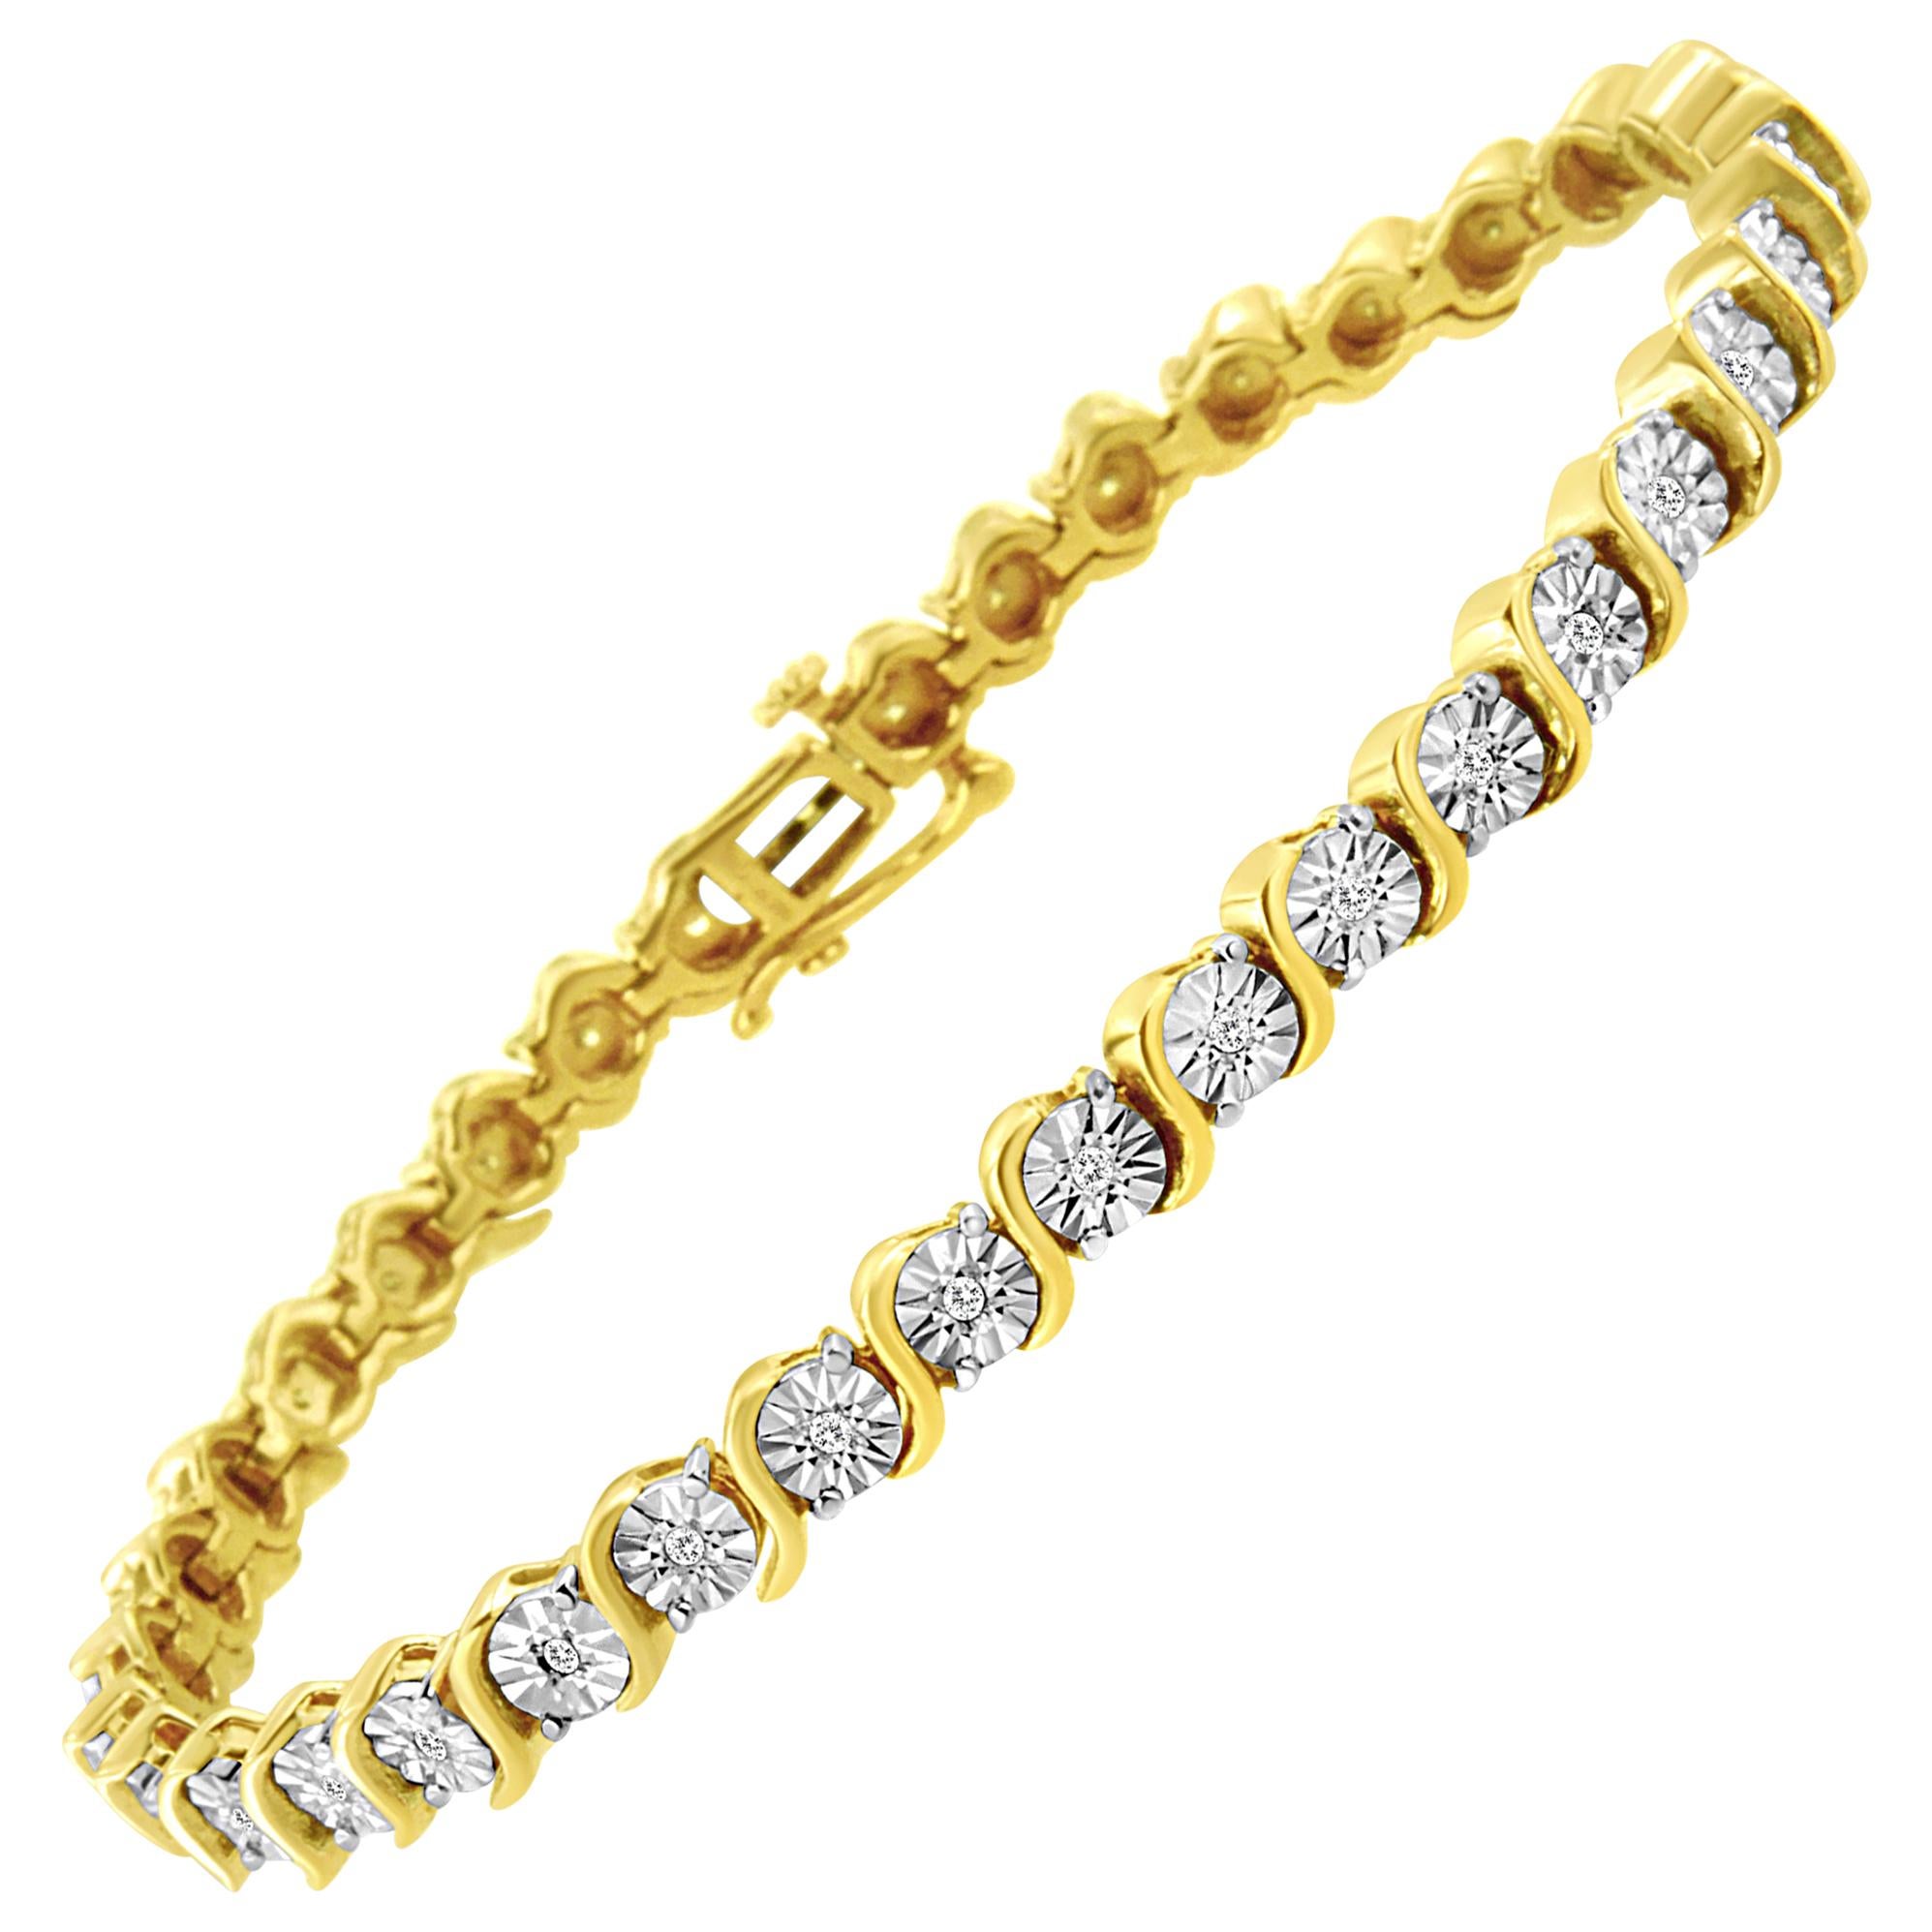 14K Yellow Gold Plated Sterling Silver 1/4 Cttw Diamond "S" Link Tennis Bracelet